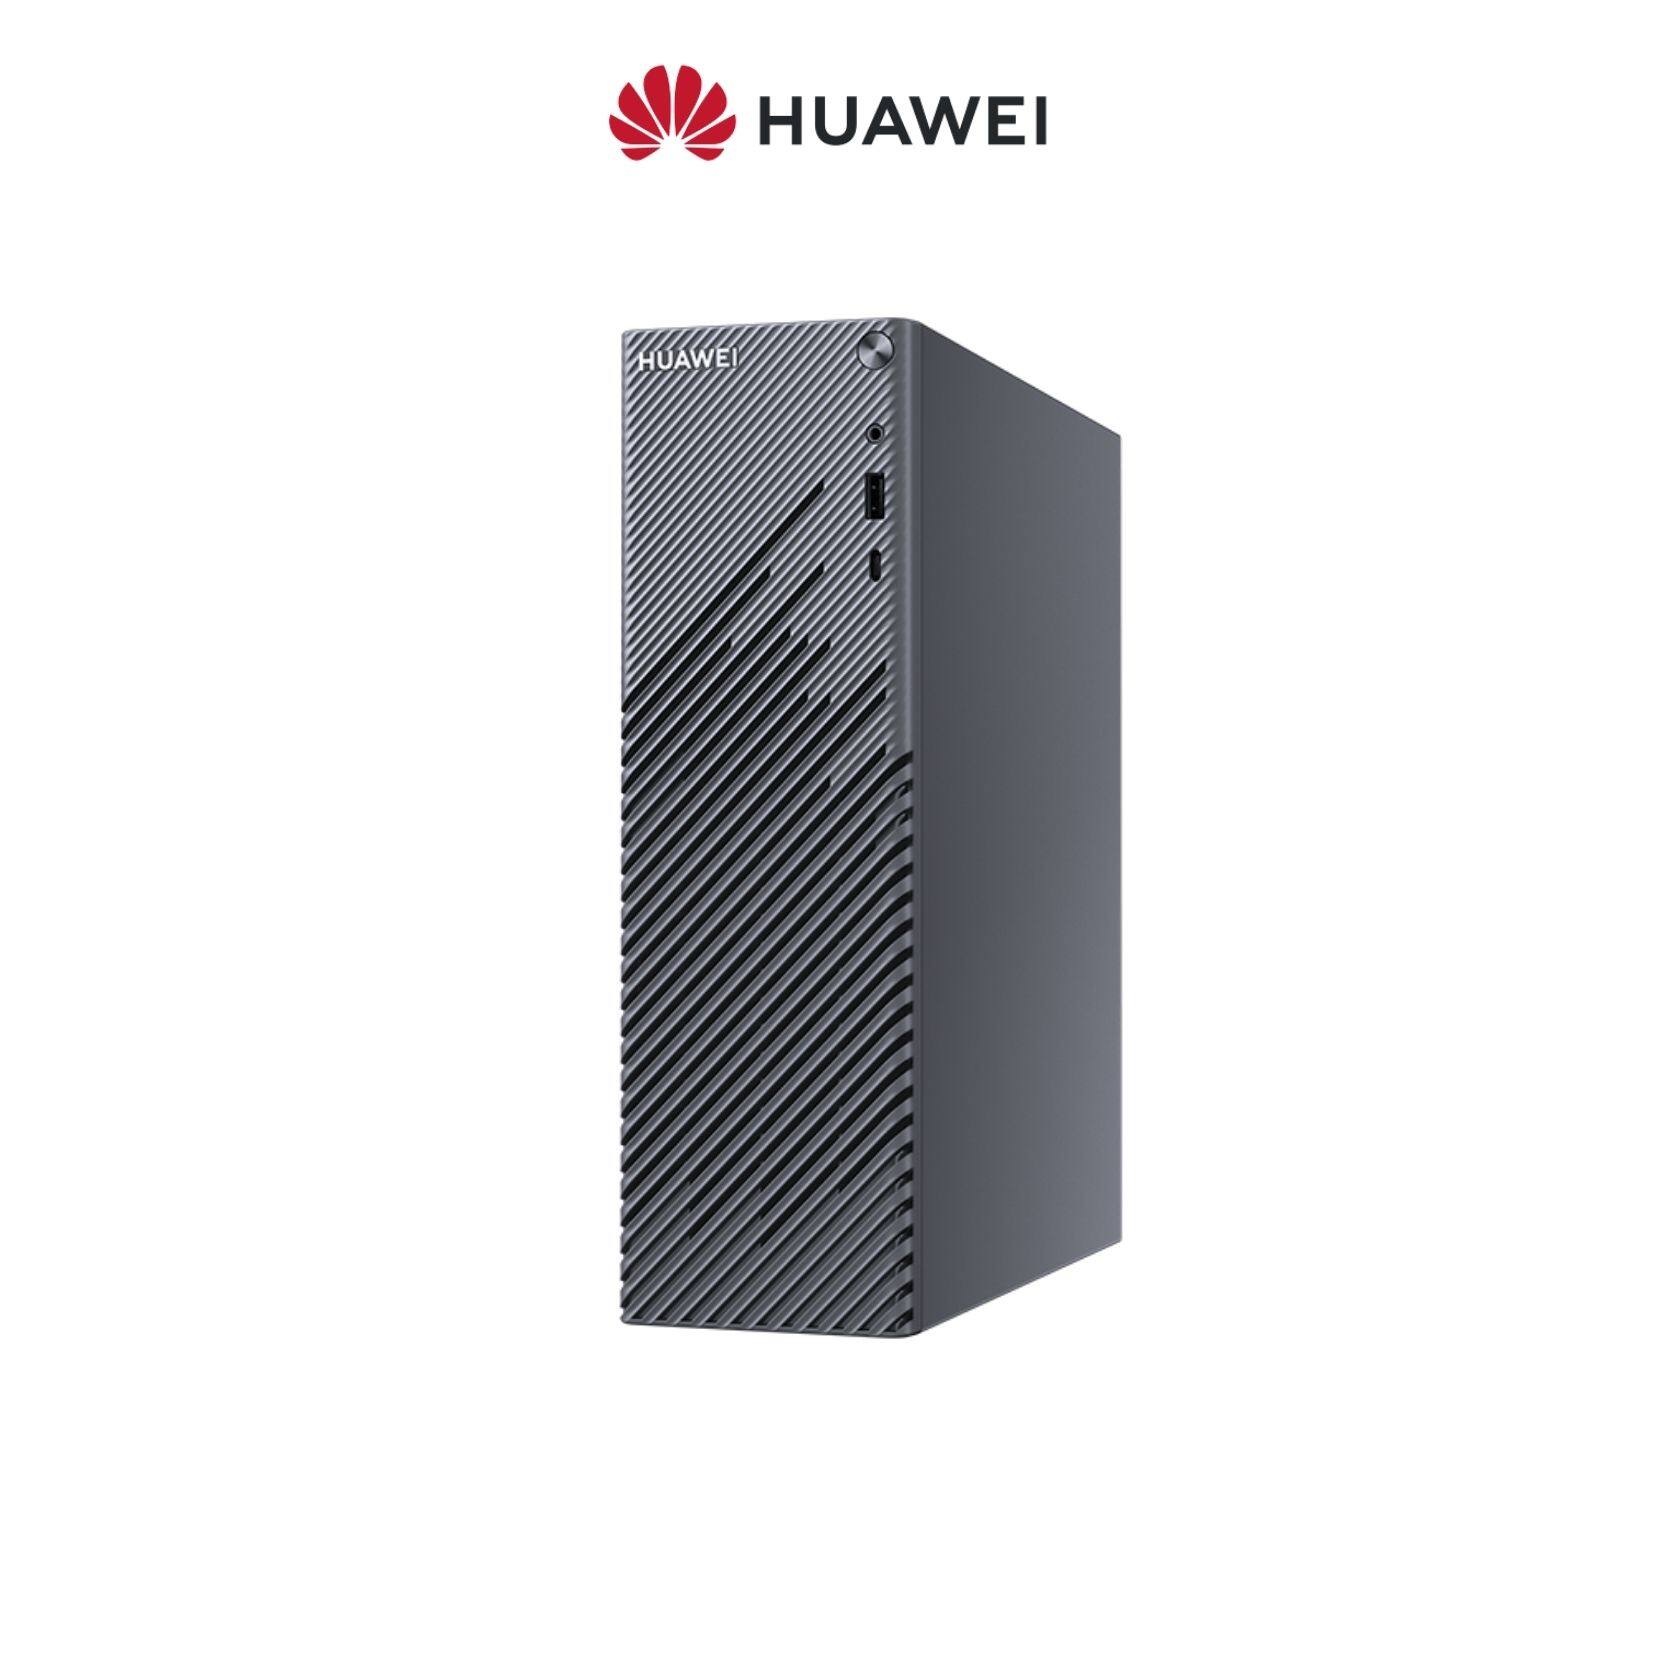 HUAWEI MateStation S R5 [ 8GB + 256GB + Radeon ] Space Grey Desktop - Small From Factor | Sleep-conducive Noise Levels | Fingerprint Security | Huawei Share